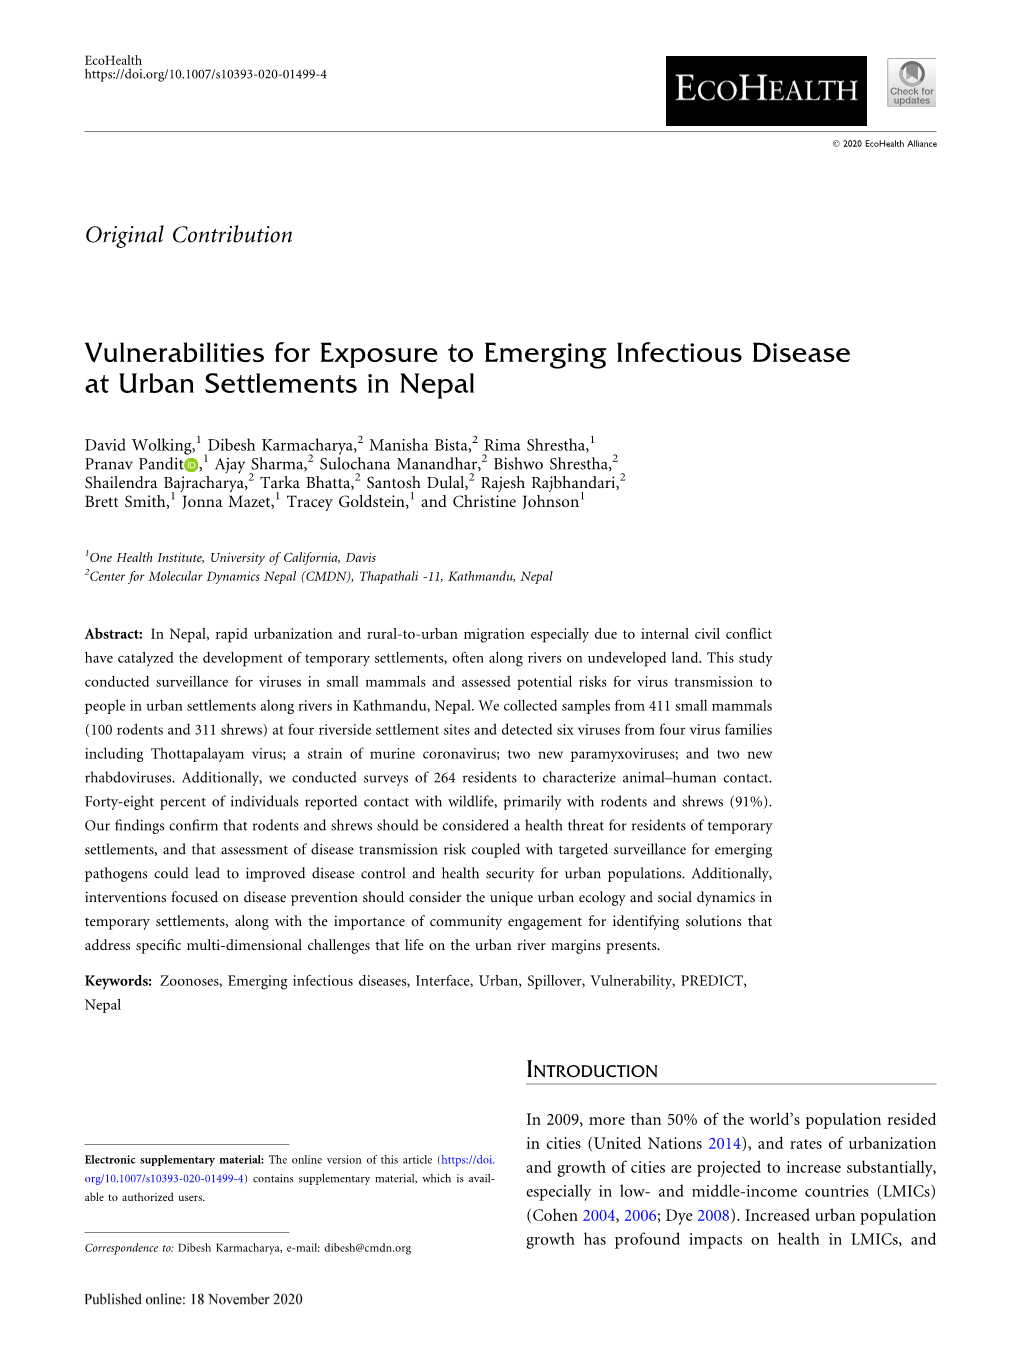 Vulnerabilities for Exposure to Emerging Infectious Disease at Urban Settlements in Nepal